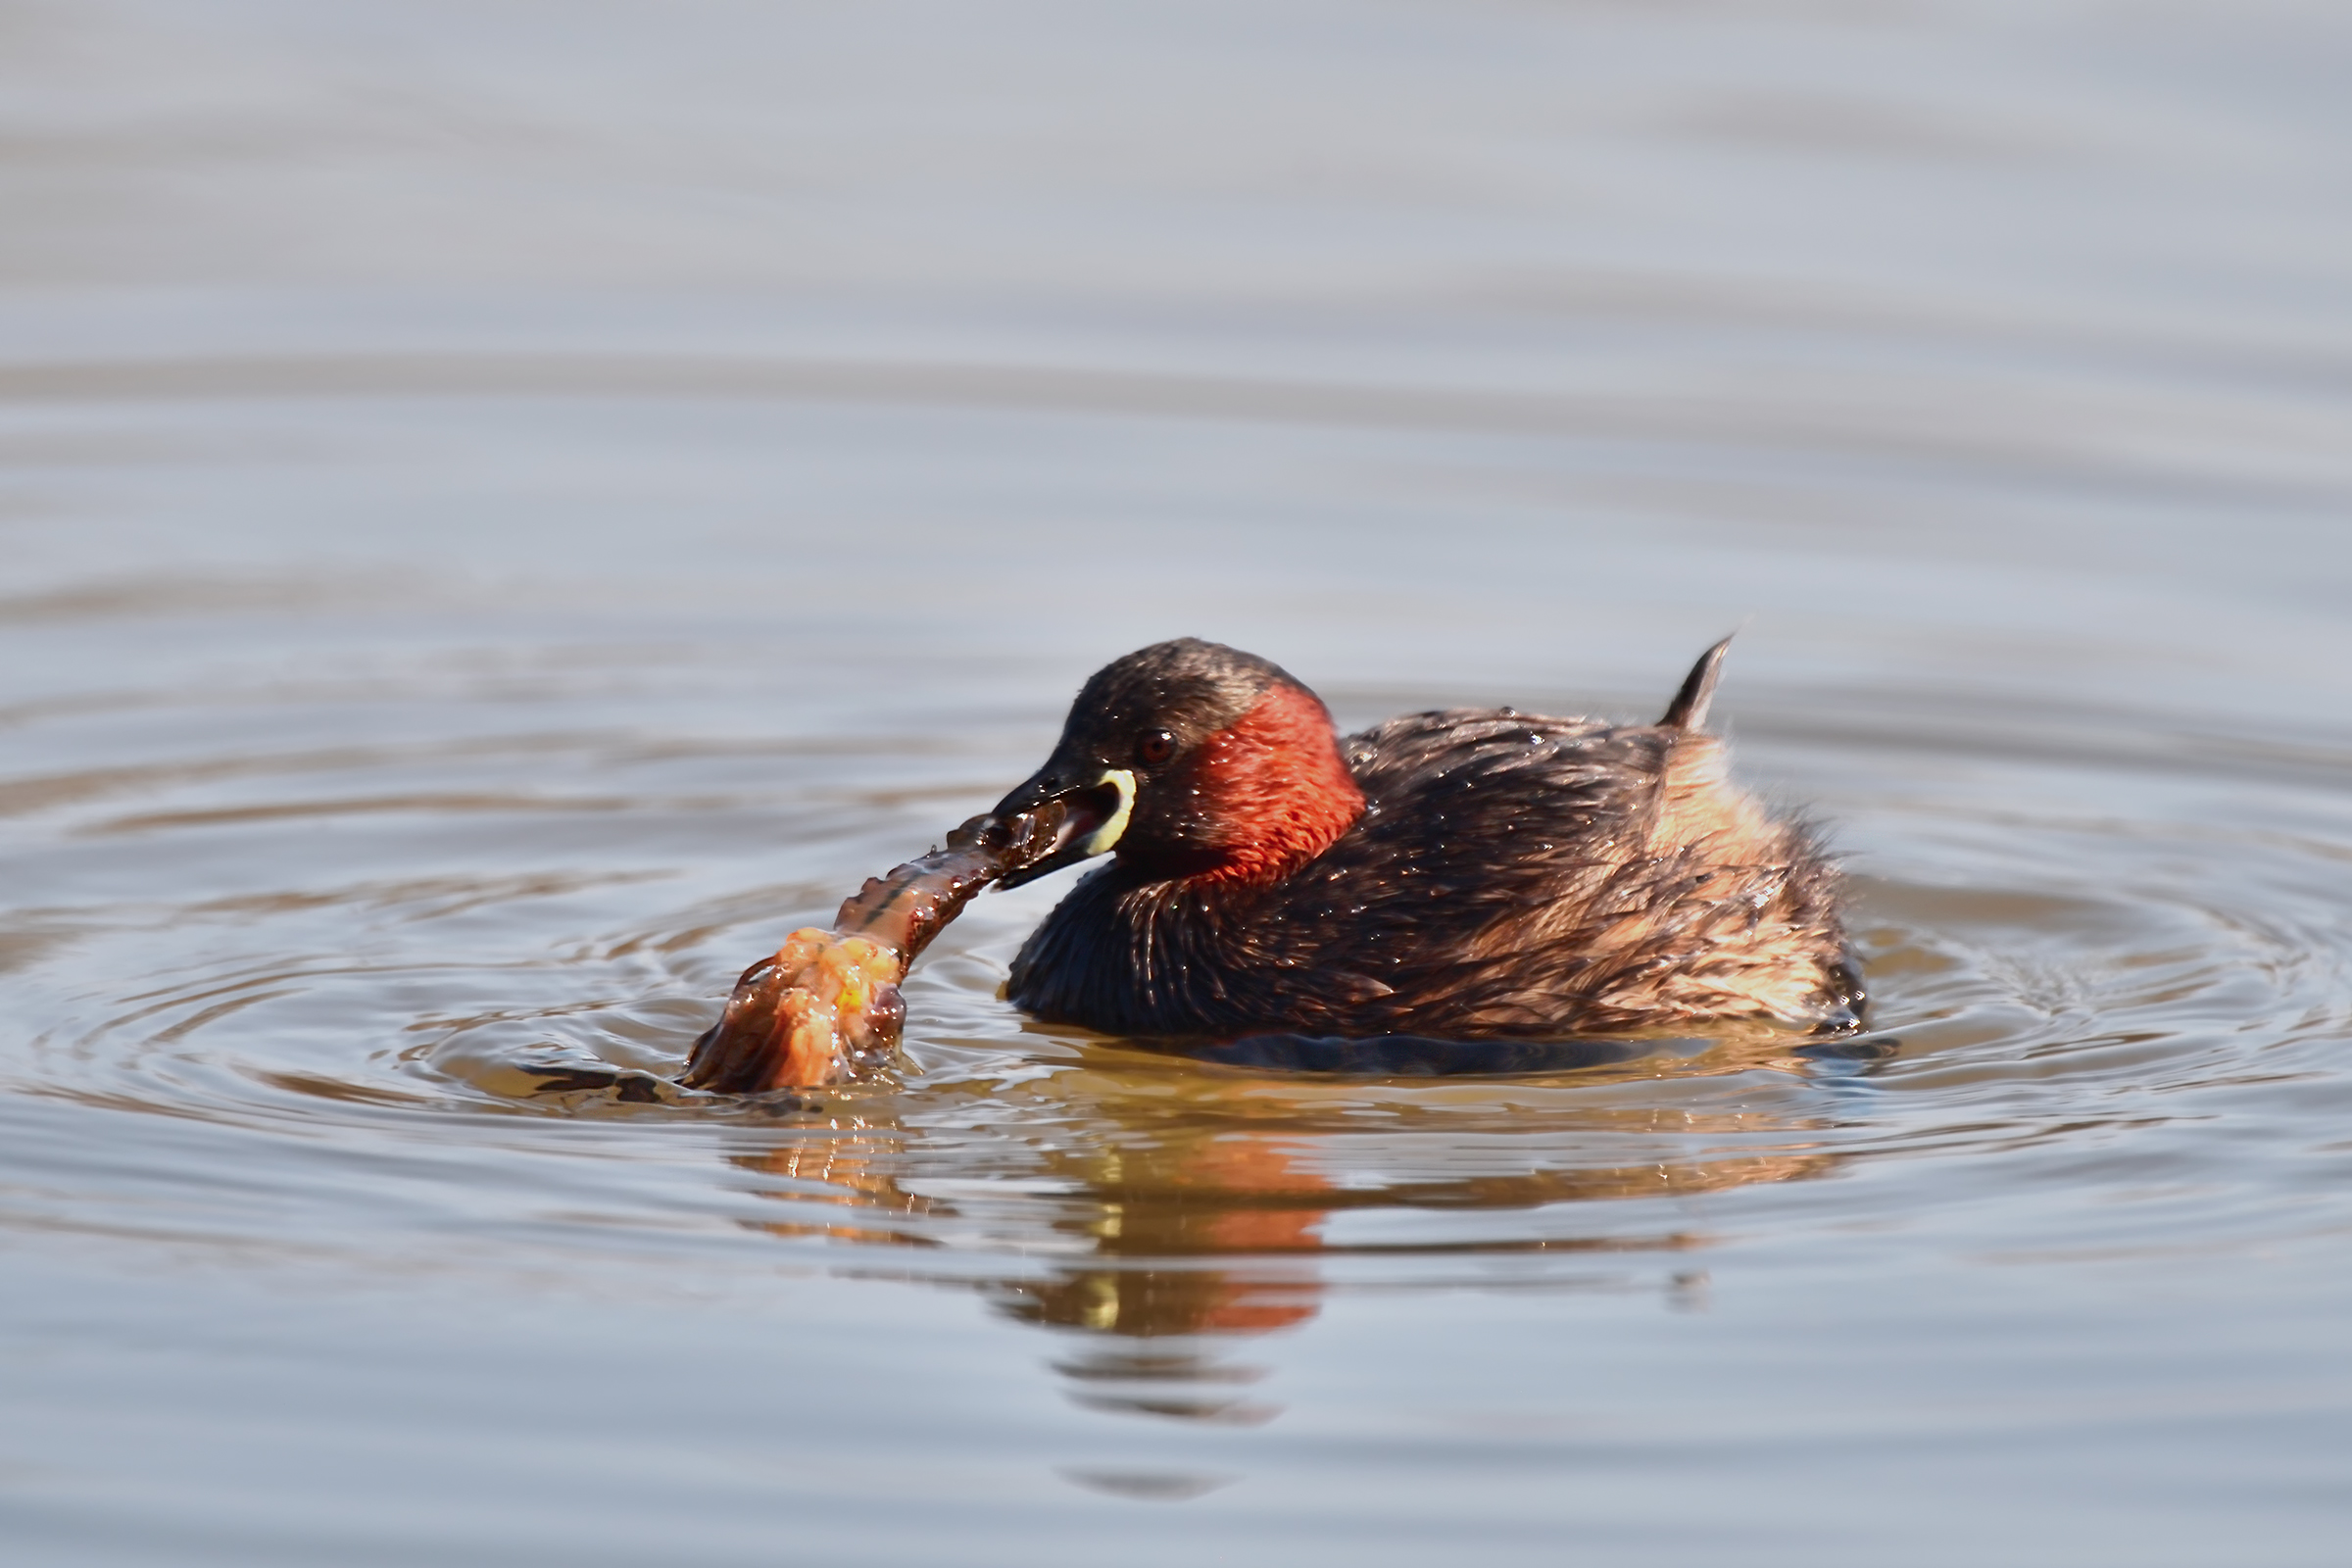 The little grebe and the Shrimp...